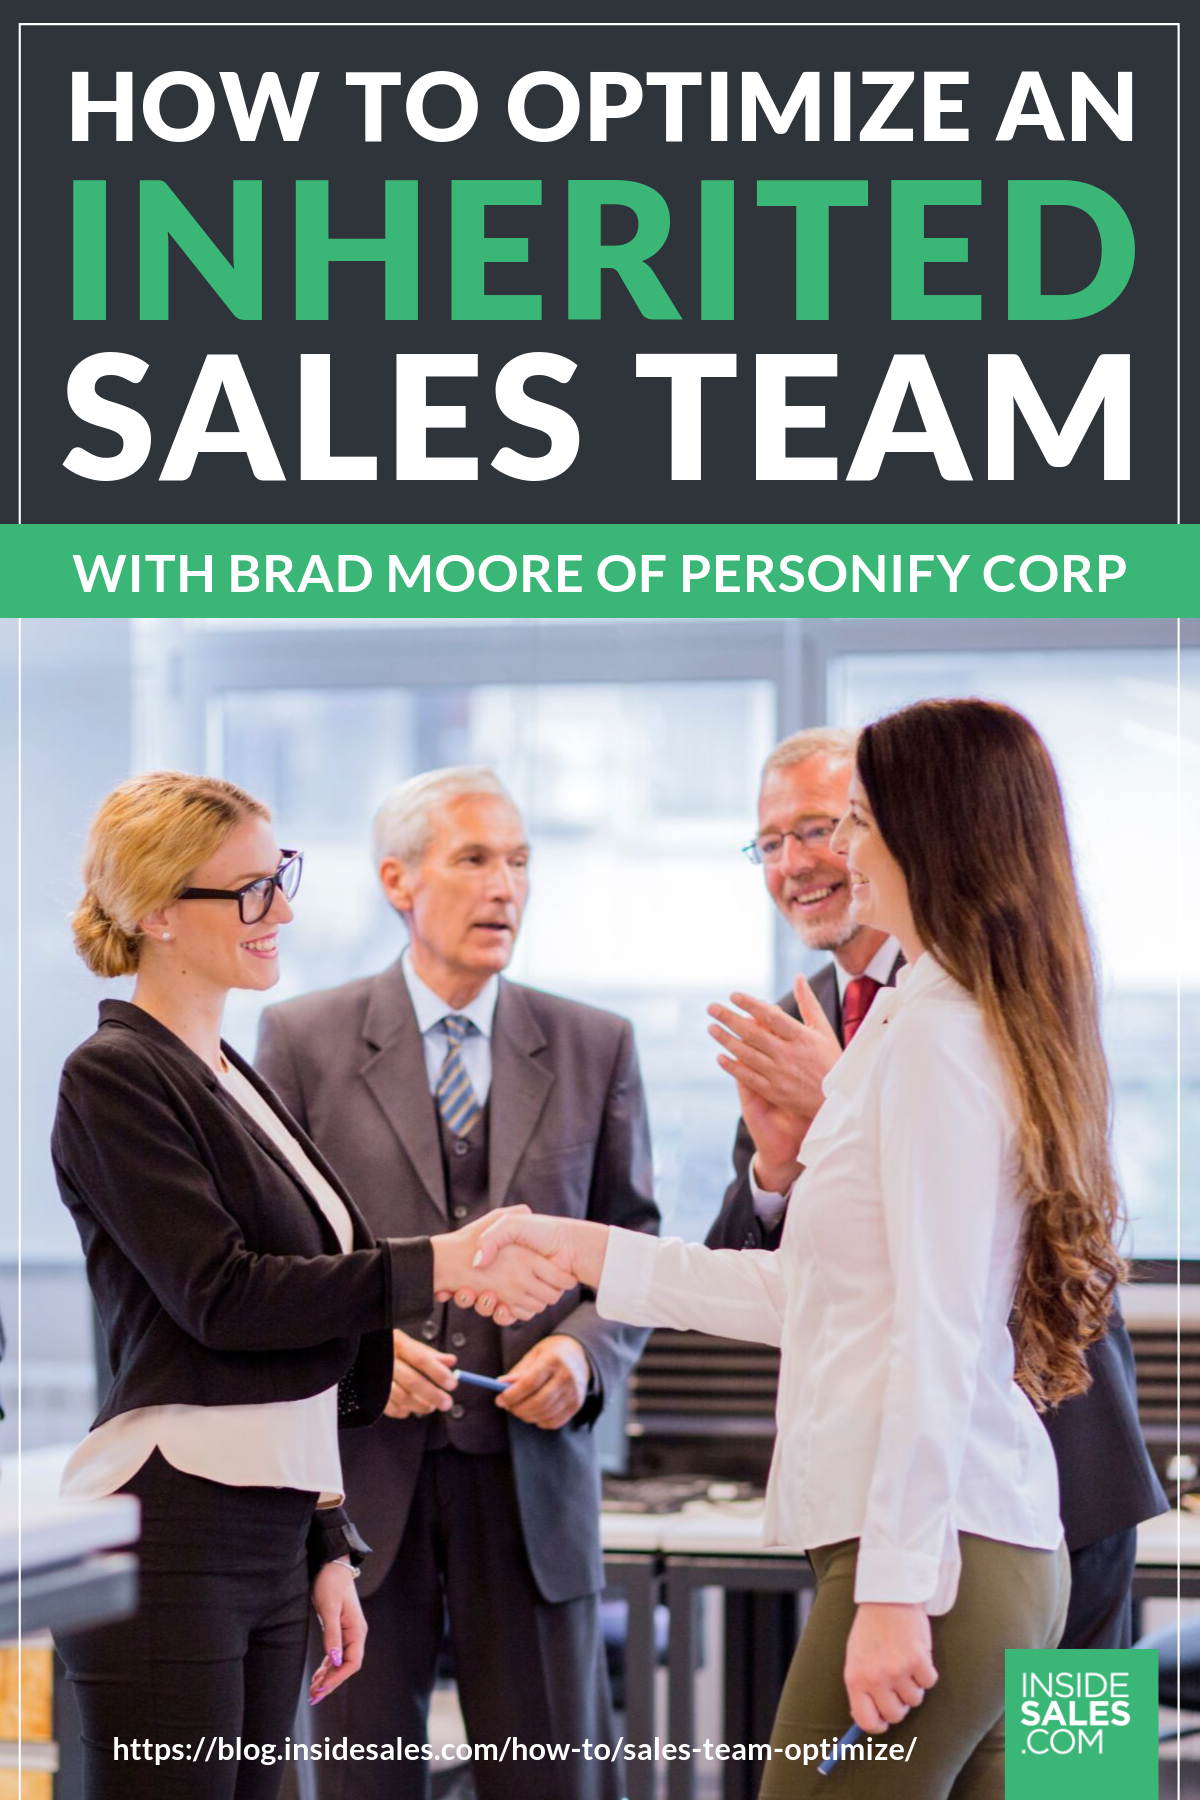 How To Optimize An Inherited Sales Team w/Brad Moore @PersonifyCorp https://www.insidesales.com/blog/how-to/sales-team-optimize/